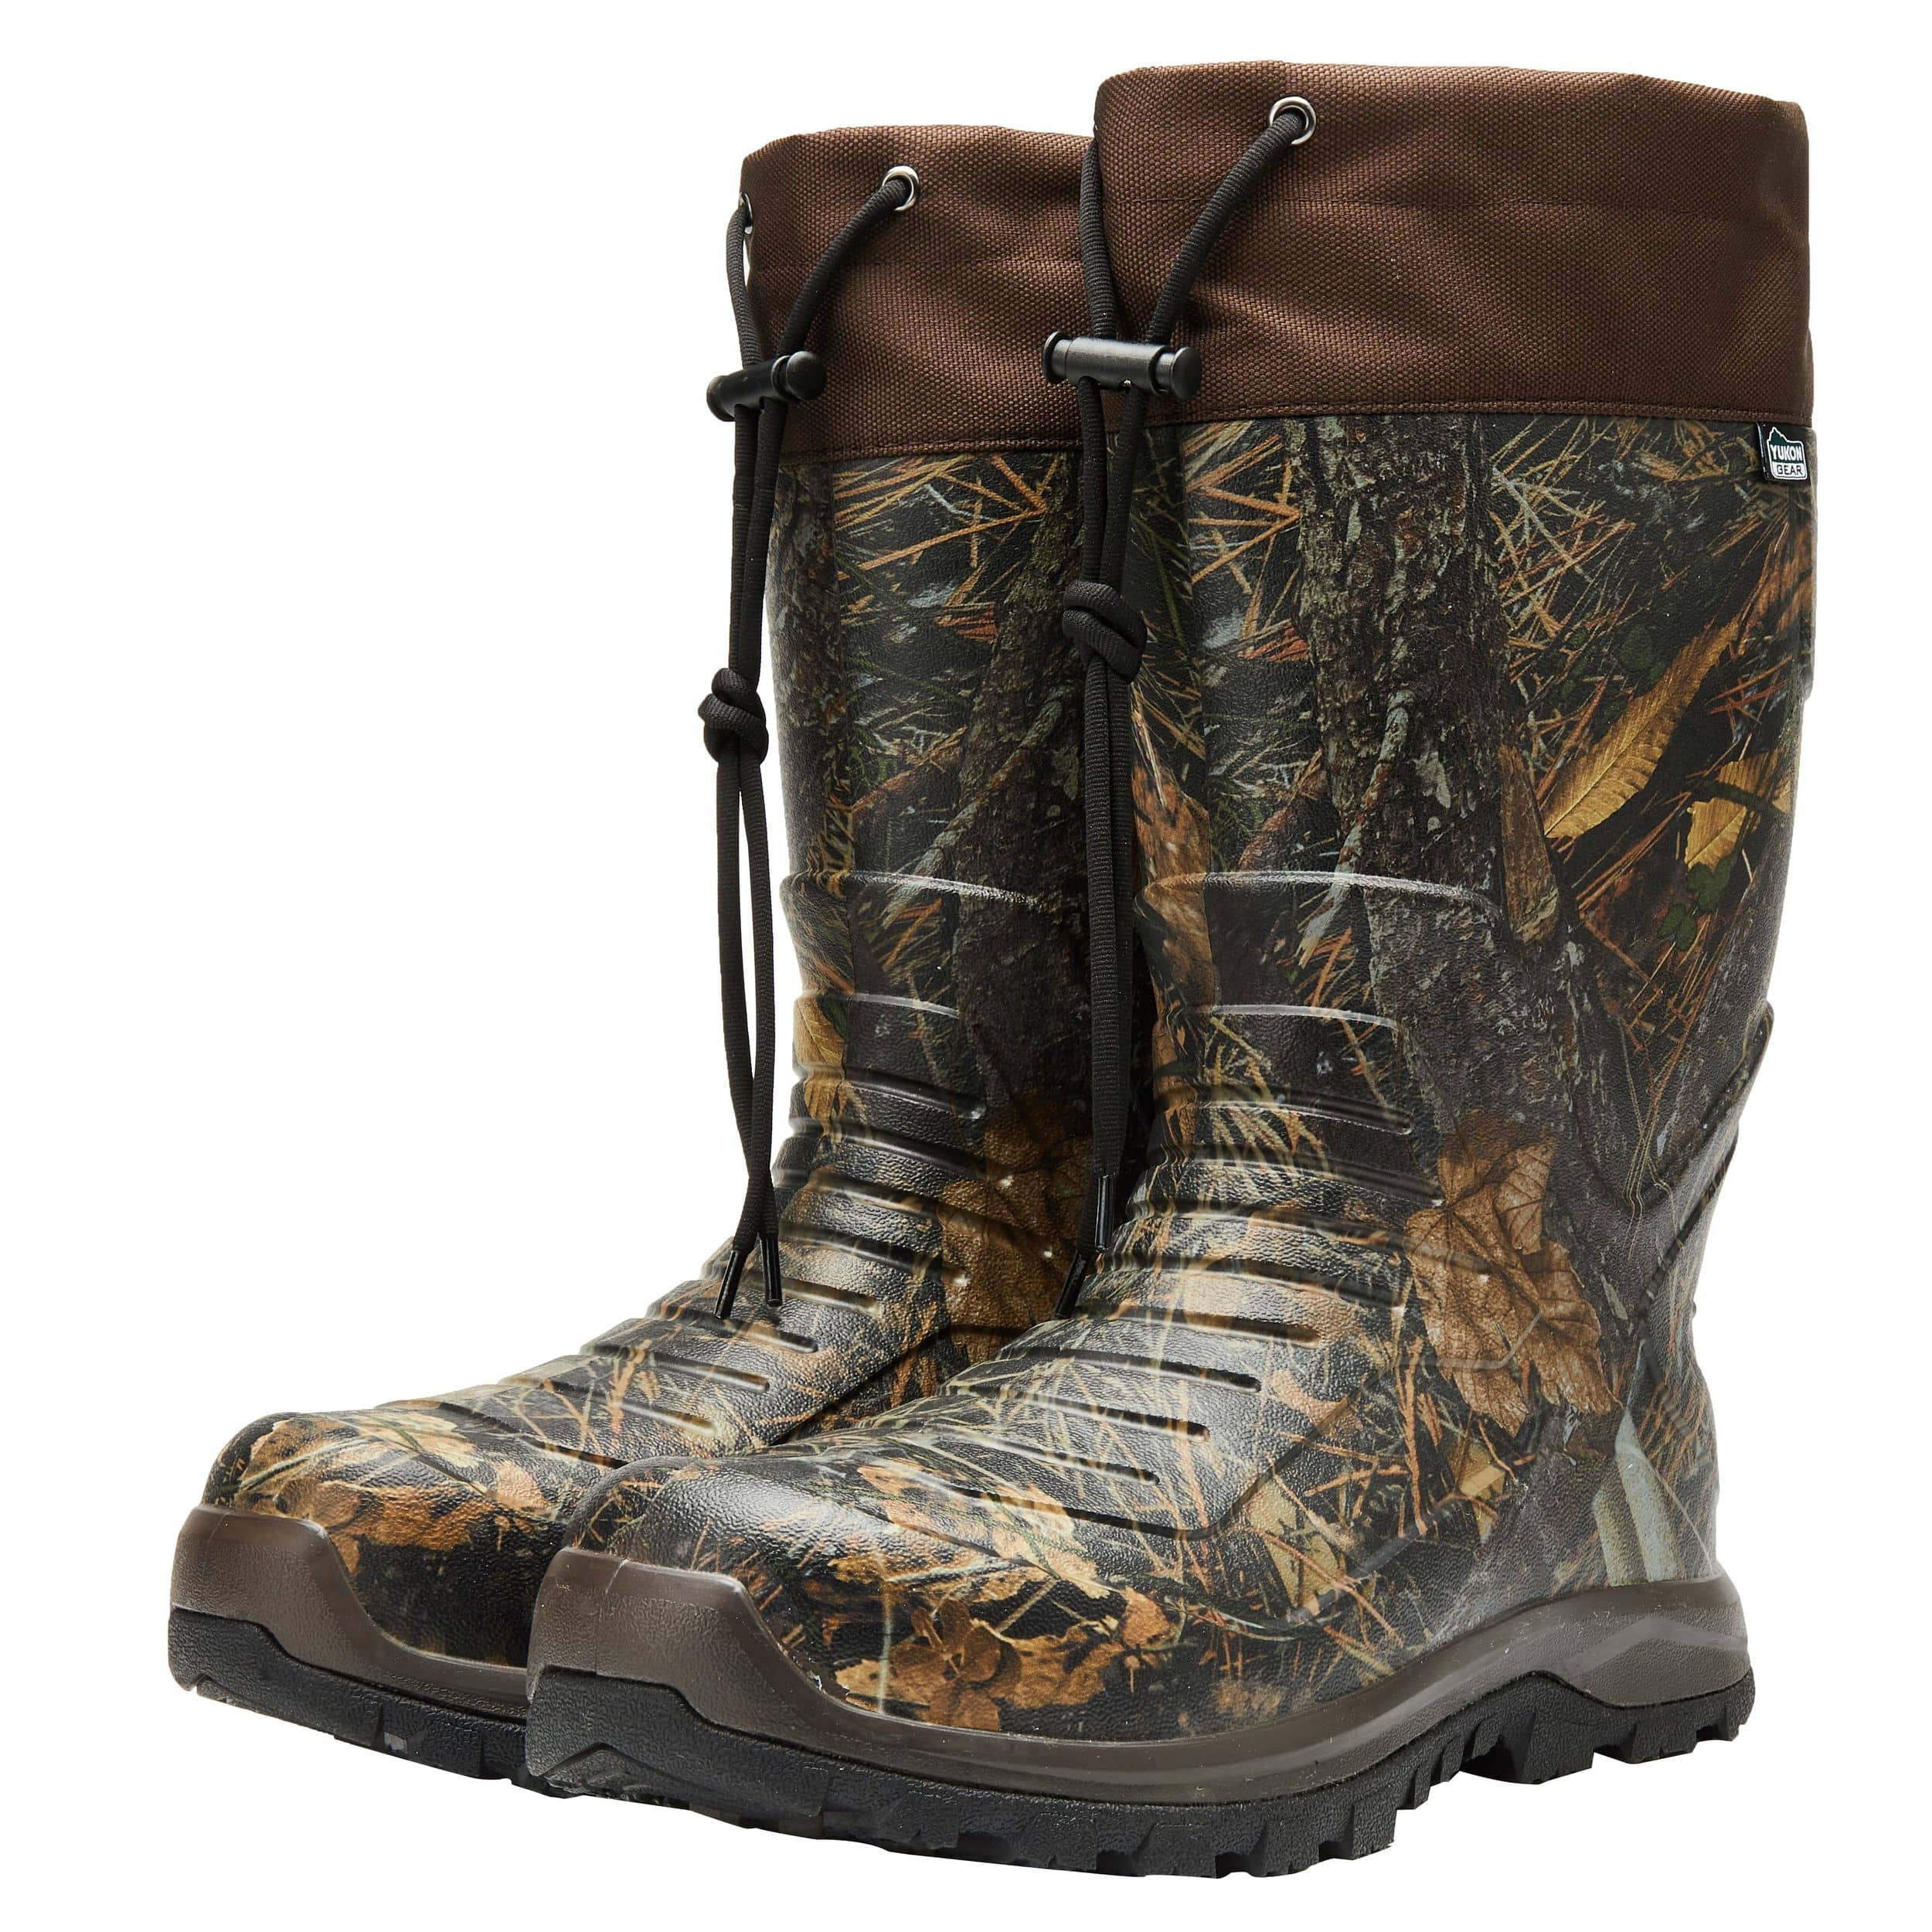 https://media-www.canadiantire.ca/product/playing/hunting/hunting-apparel-footwear/0758511/yukon-gear-camo-eva-lightweight-boots-size-8-110d2cff-ab79-4e0f-bfd0-1833a06bd64f-jpgrendition.jpg